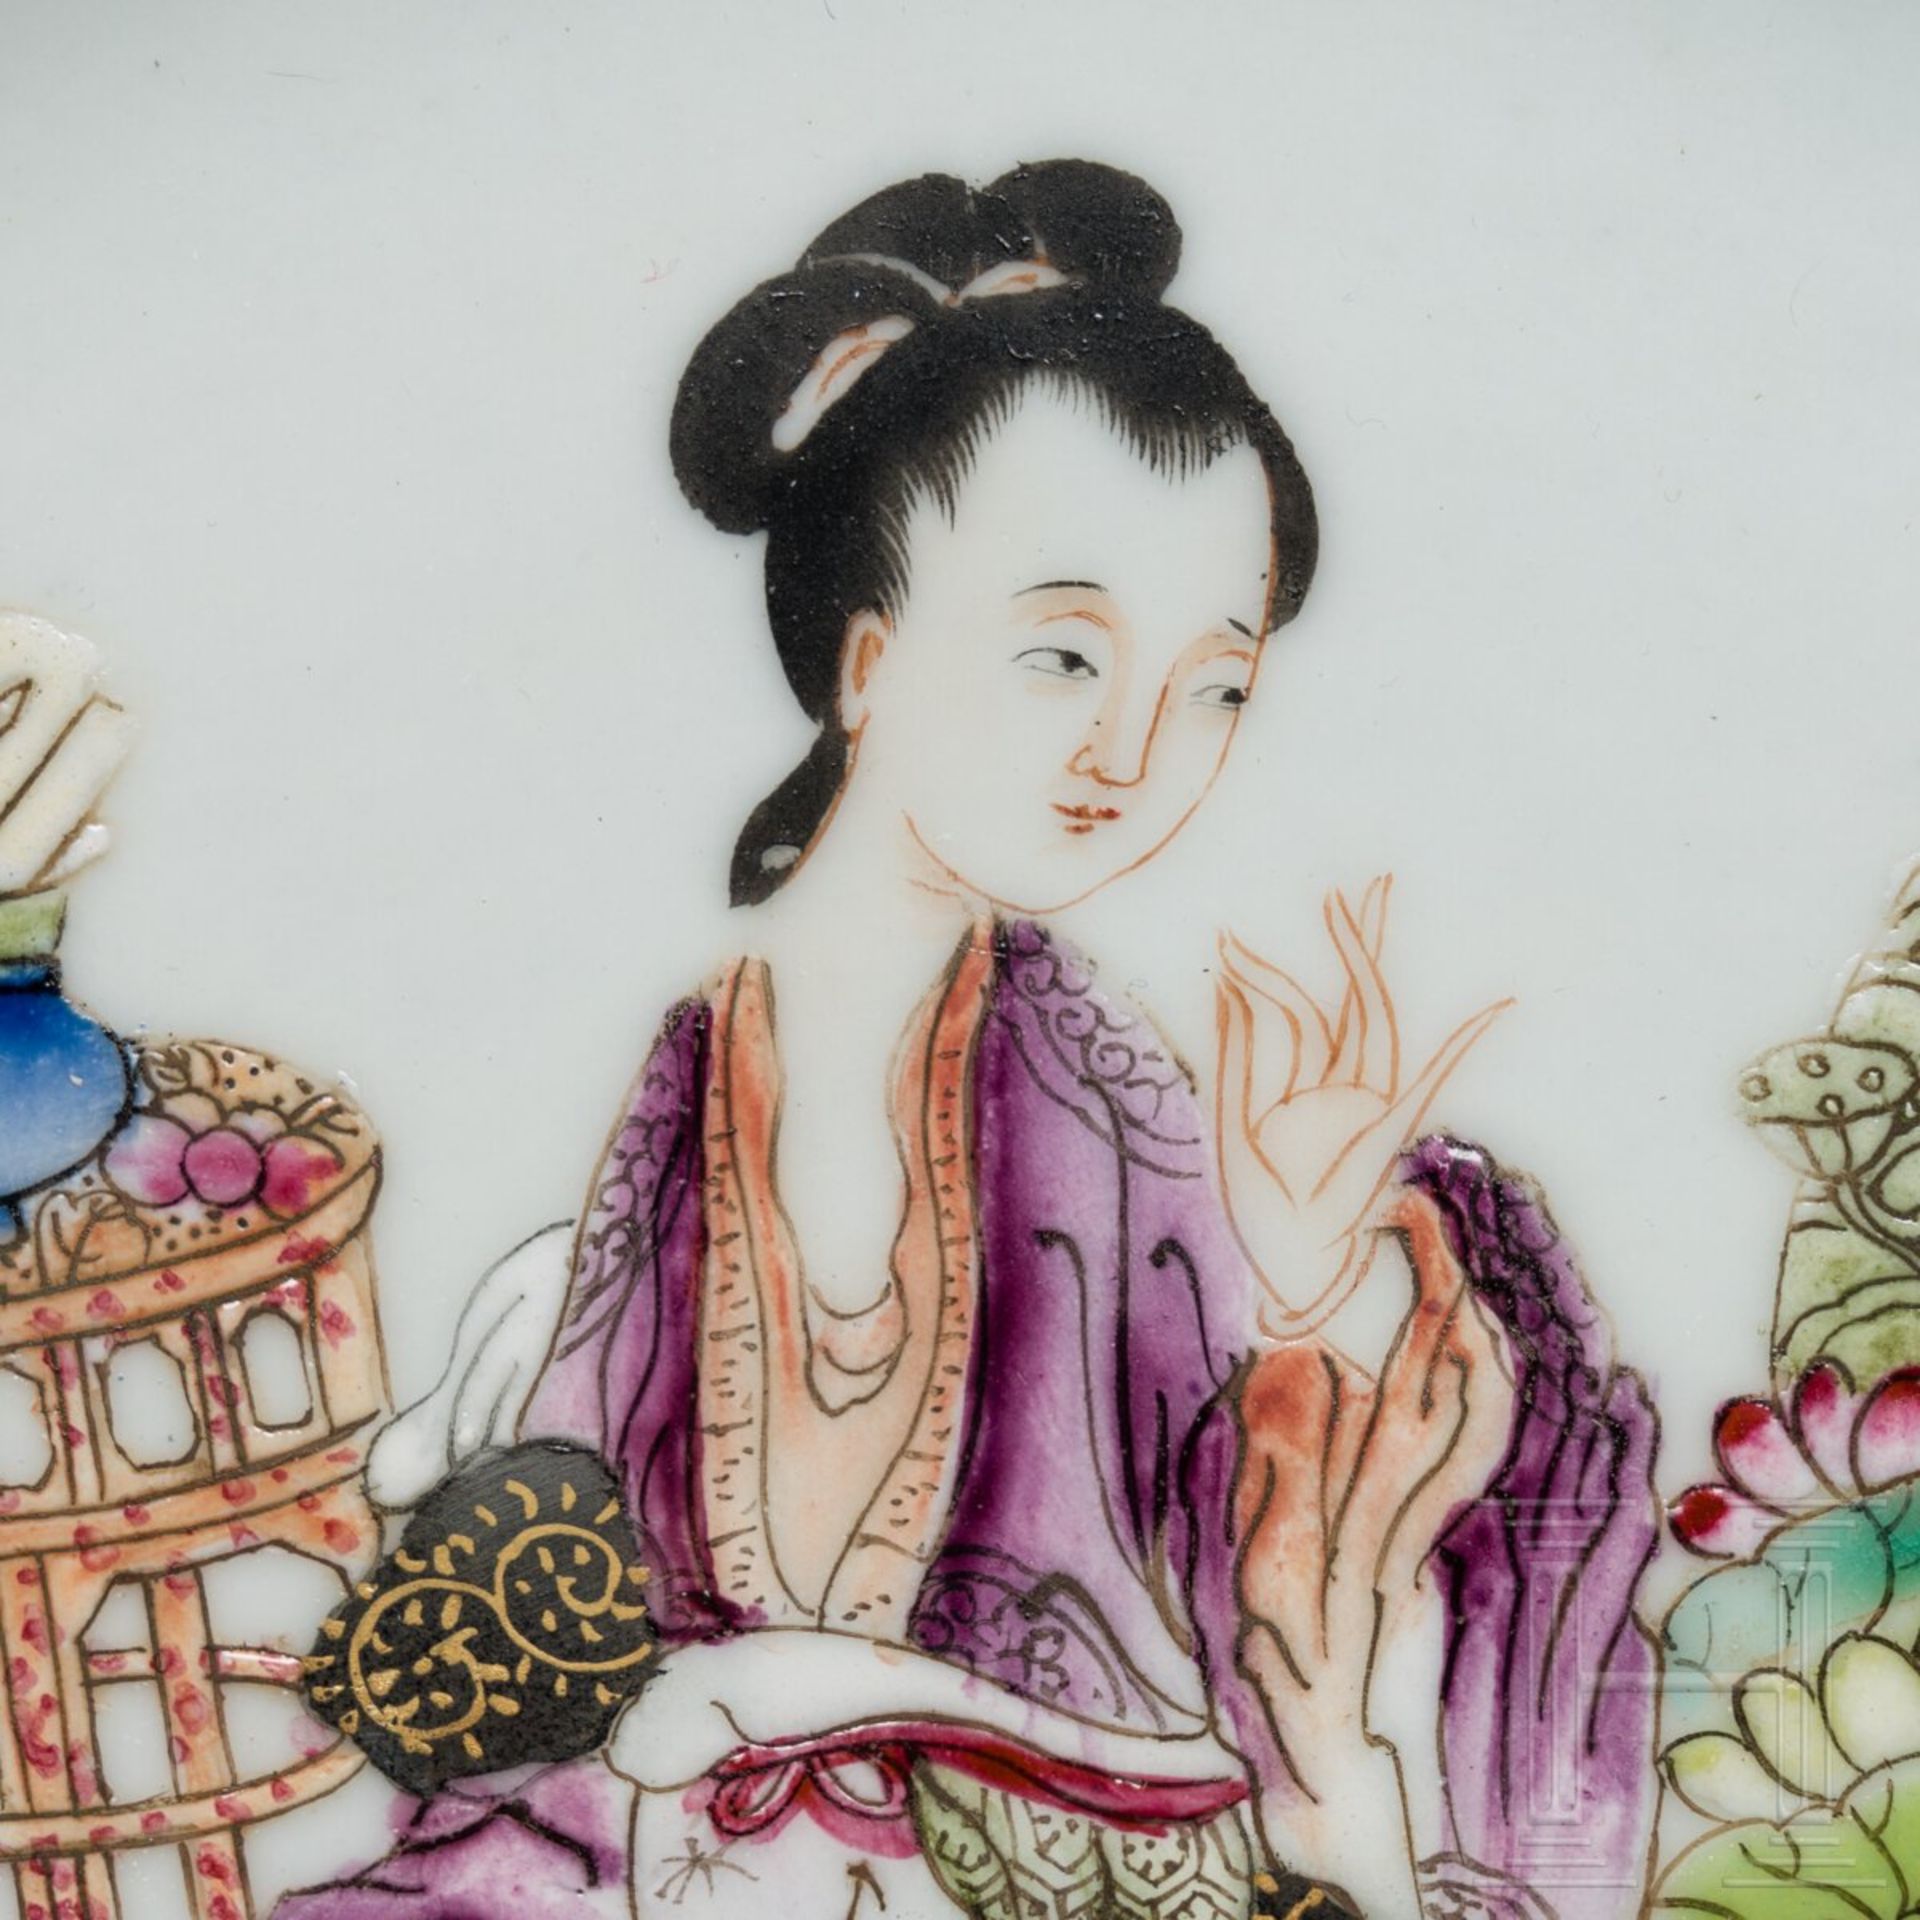 Famille Rose-Teller, Exportware, wohl Qianlong-Periode (1735 - 1796), 18. Jhdt. - Image 3 of 16